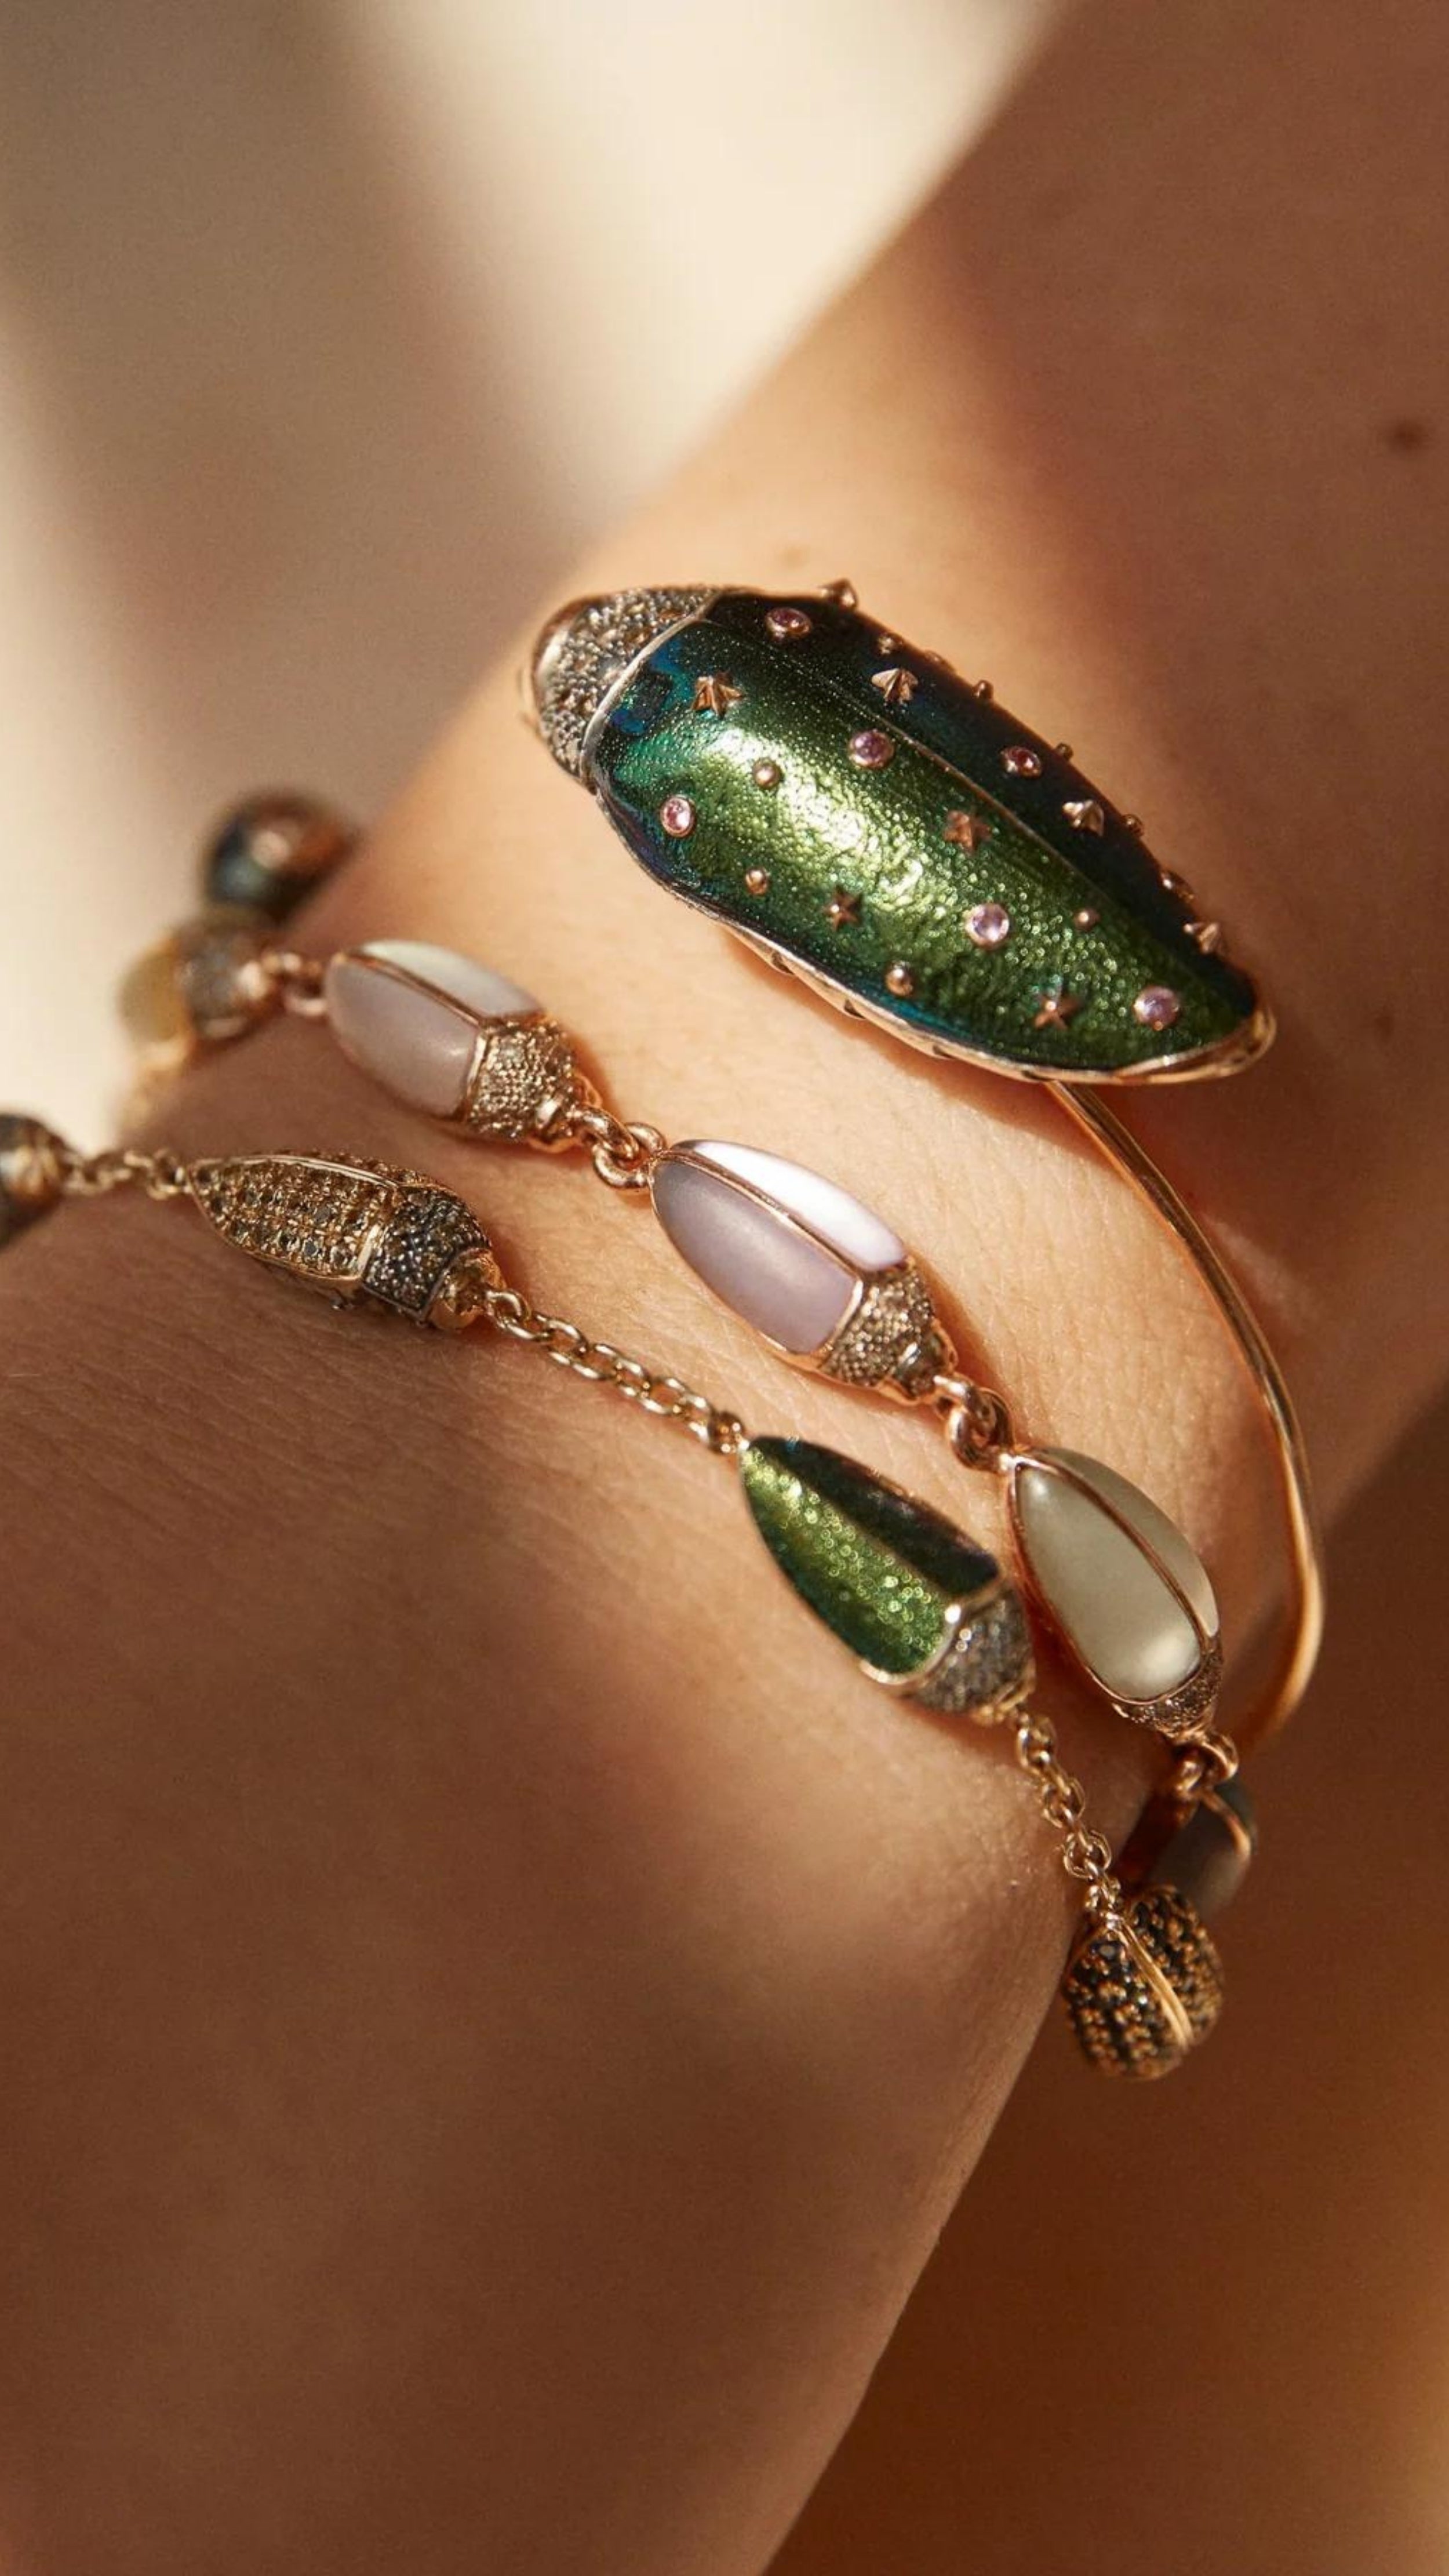 Bibi van der Velden Mini Scarab Eternity Bracelet. Made in 18k rose gold, this bracelet has nine  scarab beetles, each made with translucent, matte gemstones in soft shades. The beetles' heads are paved with pale brown diamonds. Shown being worn on an arm.